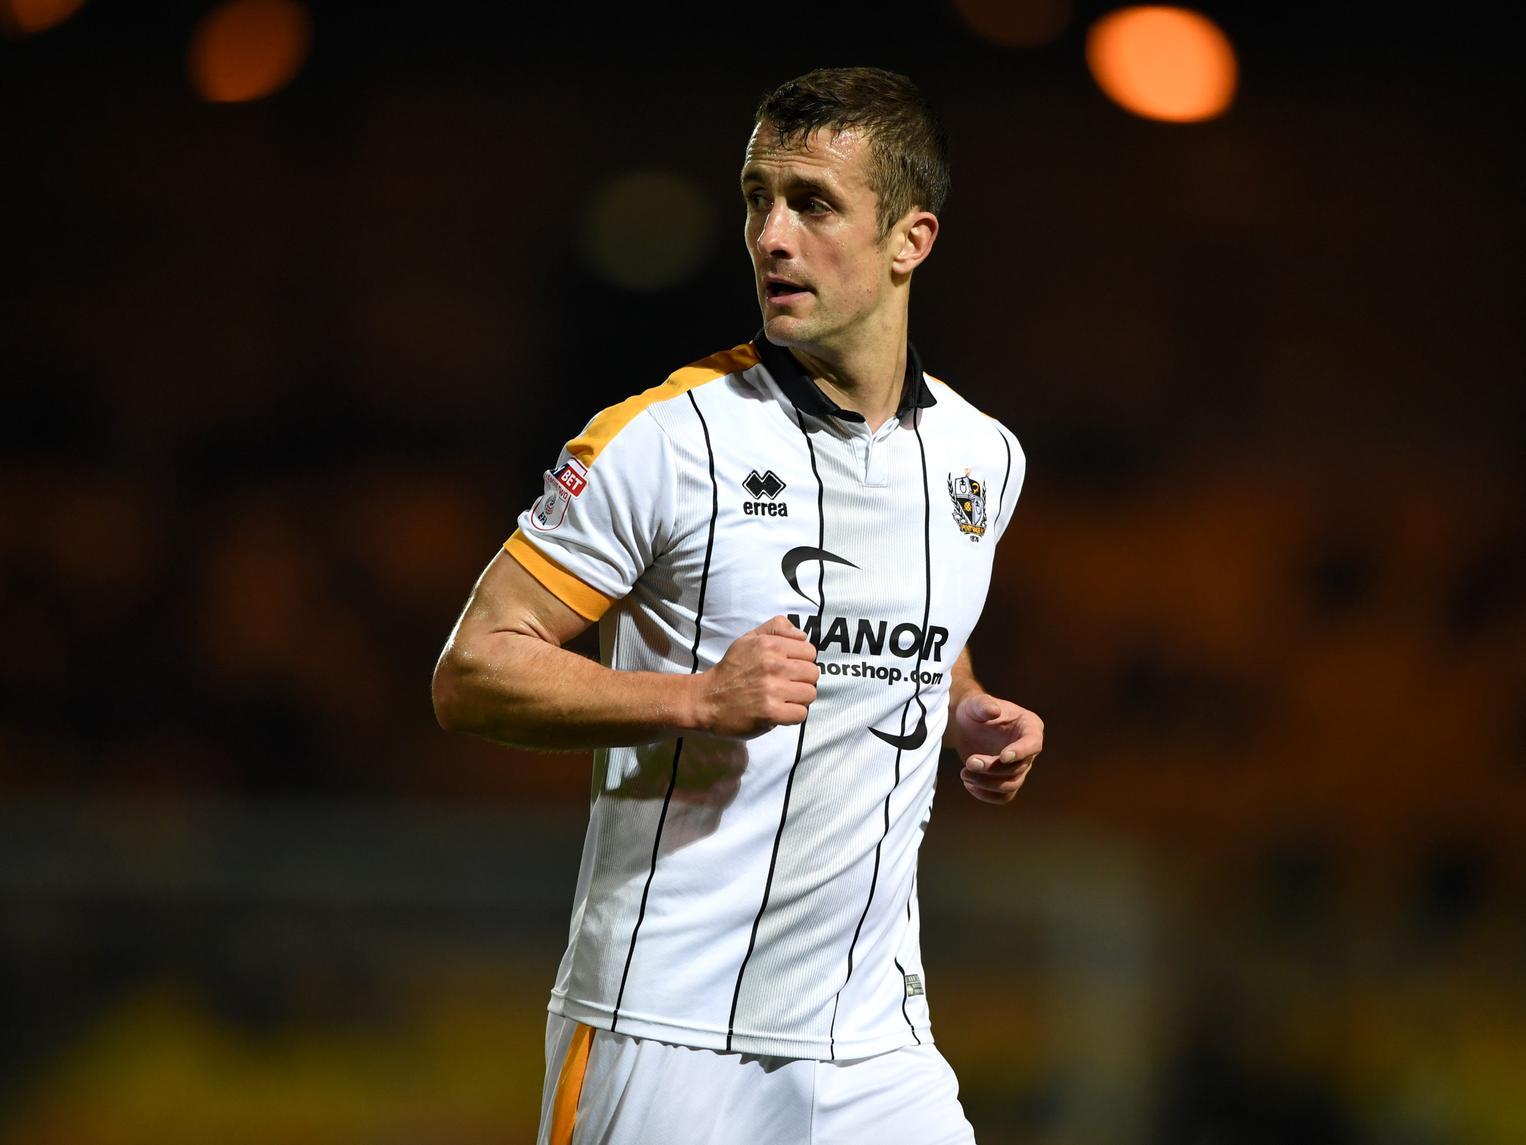 After impressing during a loan spell at the start of the 2011/12 season, he was signed permanently by Leeds in the new year. He ended up at Port Vale, where he became a coach after retiring.